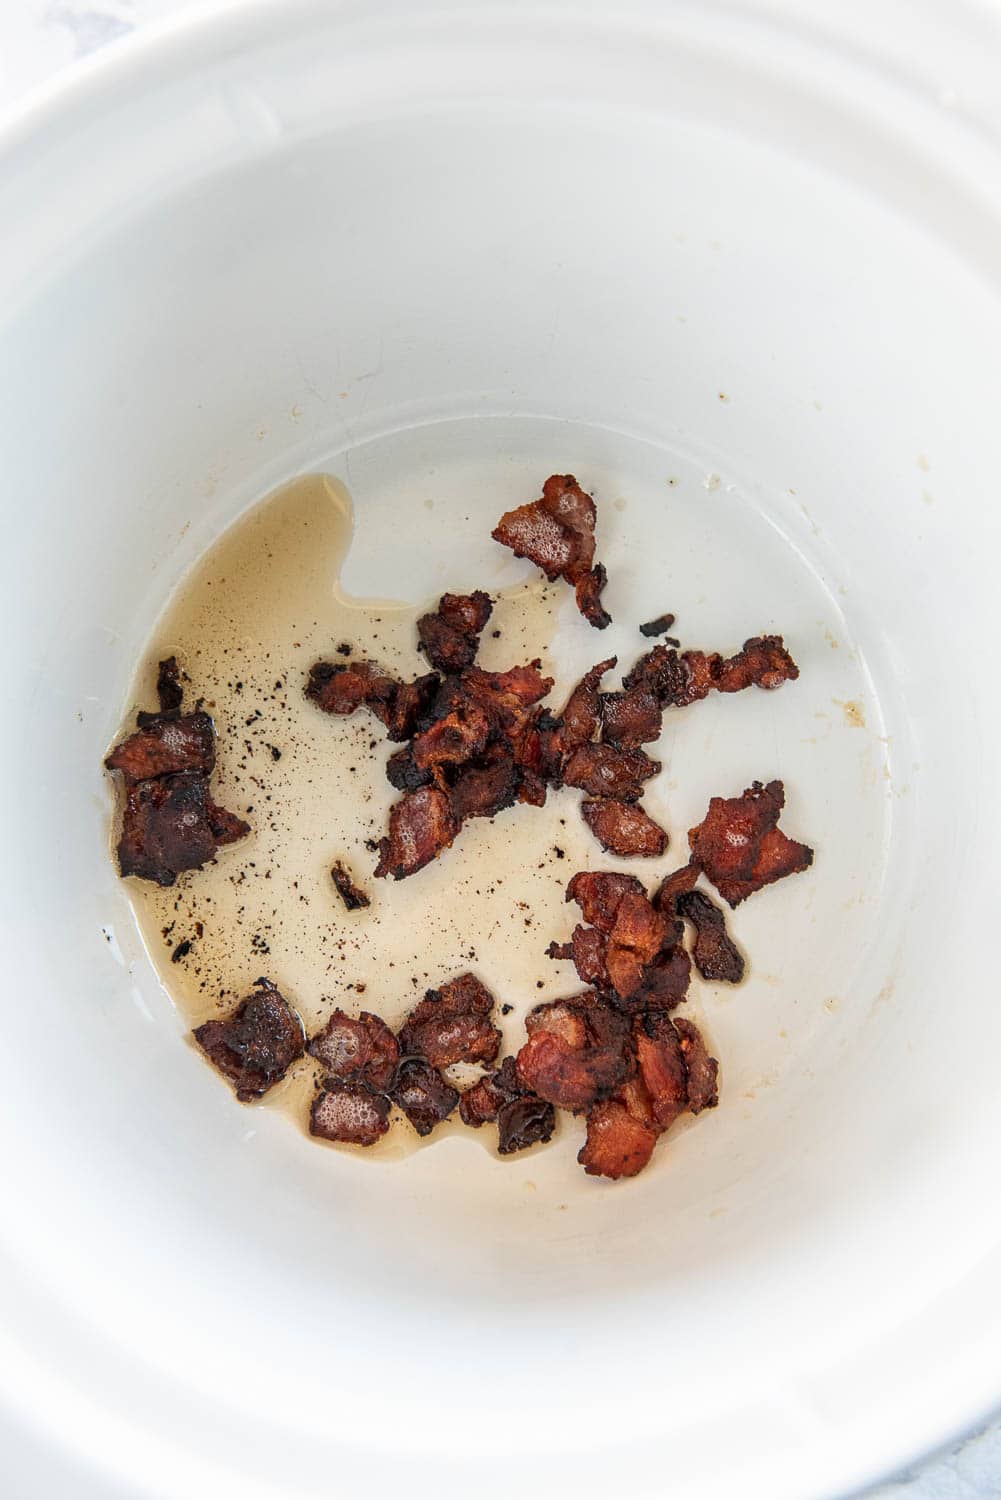 Bacon pieces cooking in the slow cooker